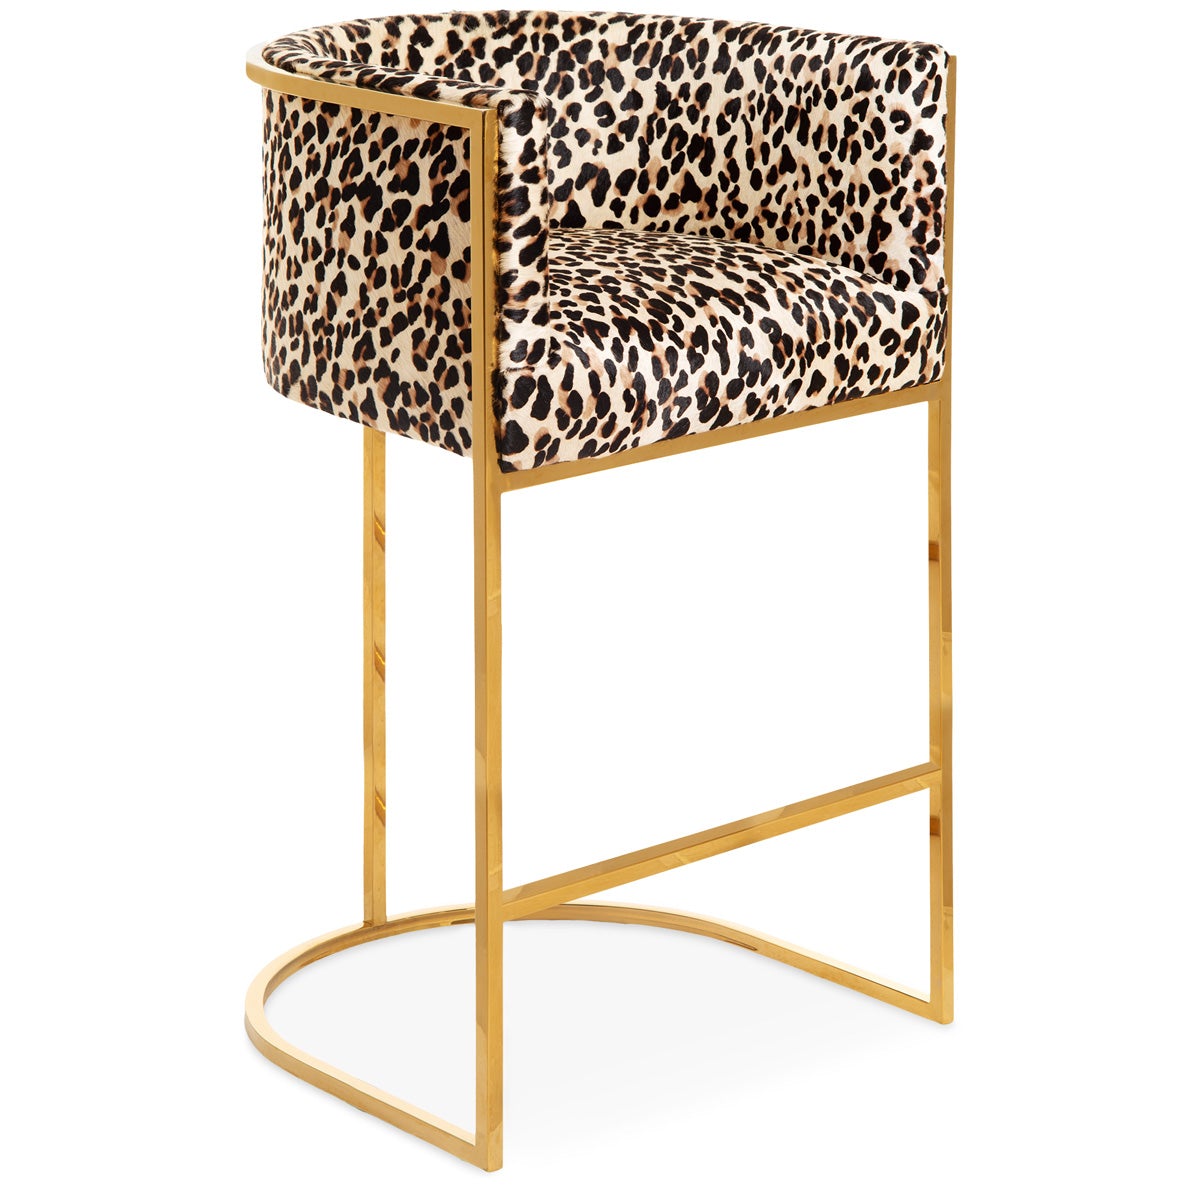 Lisbon Bar and Counter Stool in Leopard Print Cowhide - ModShop1.com